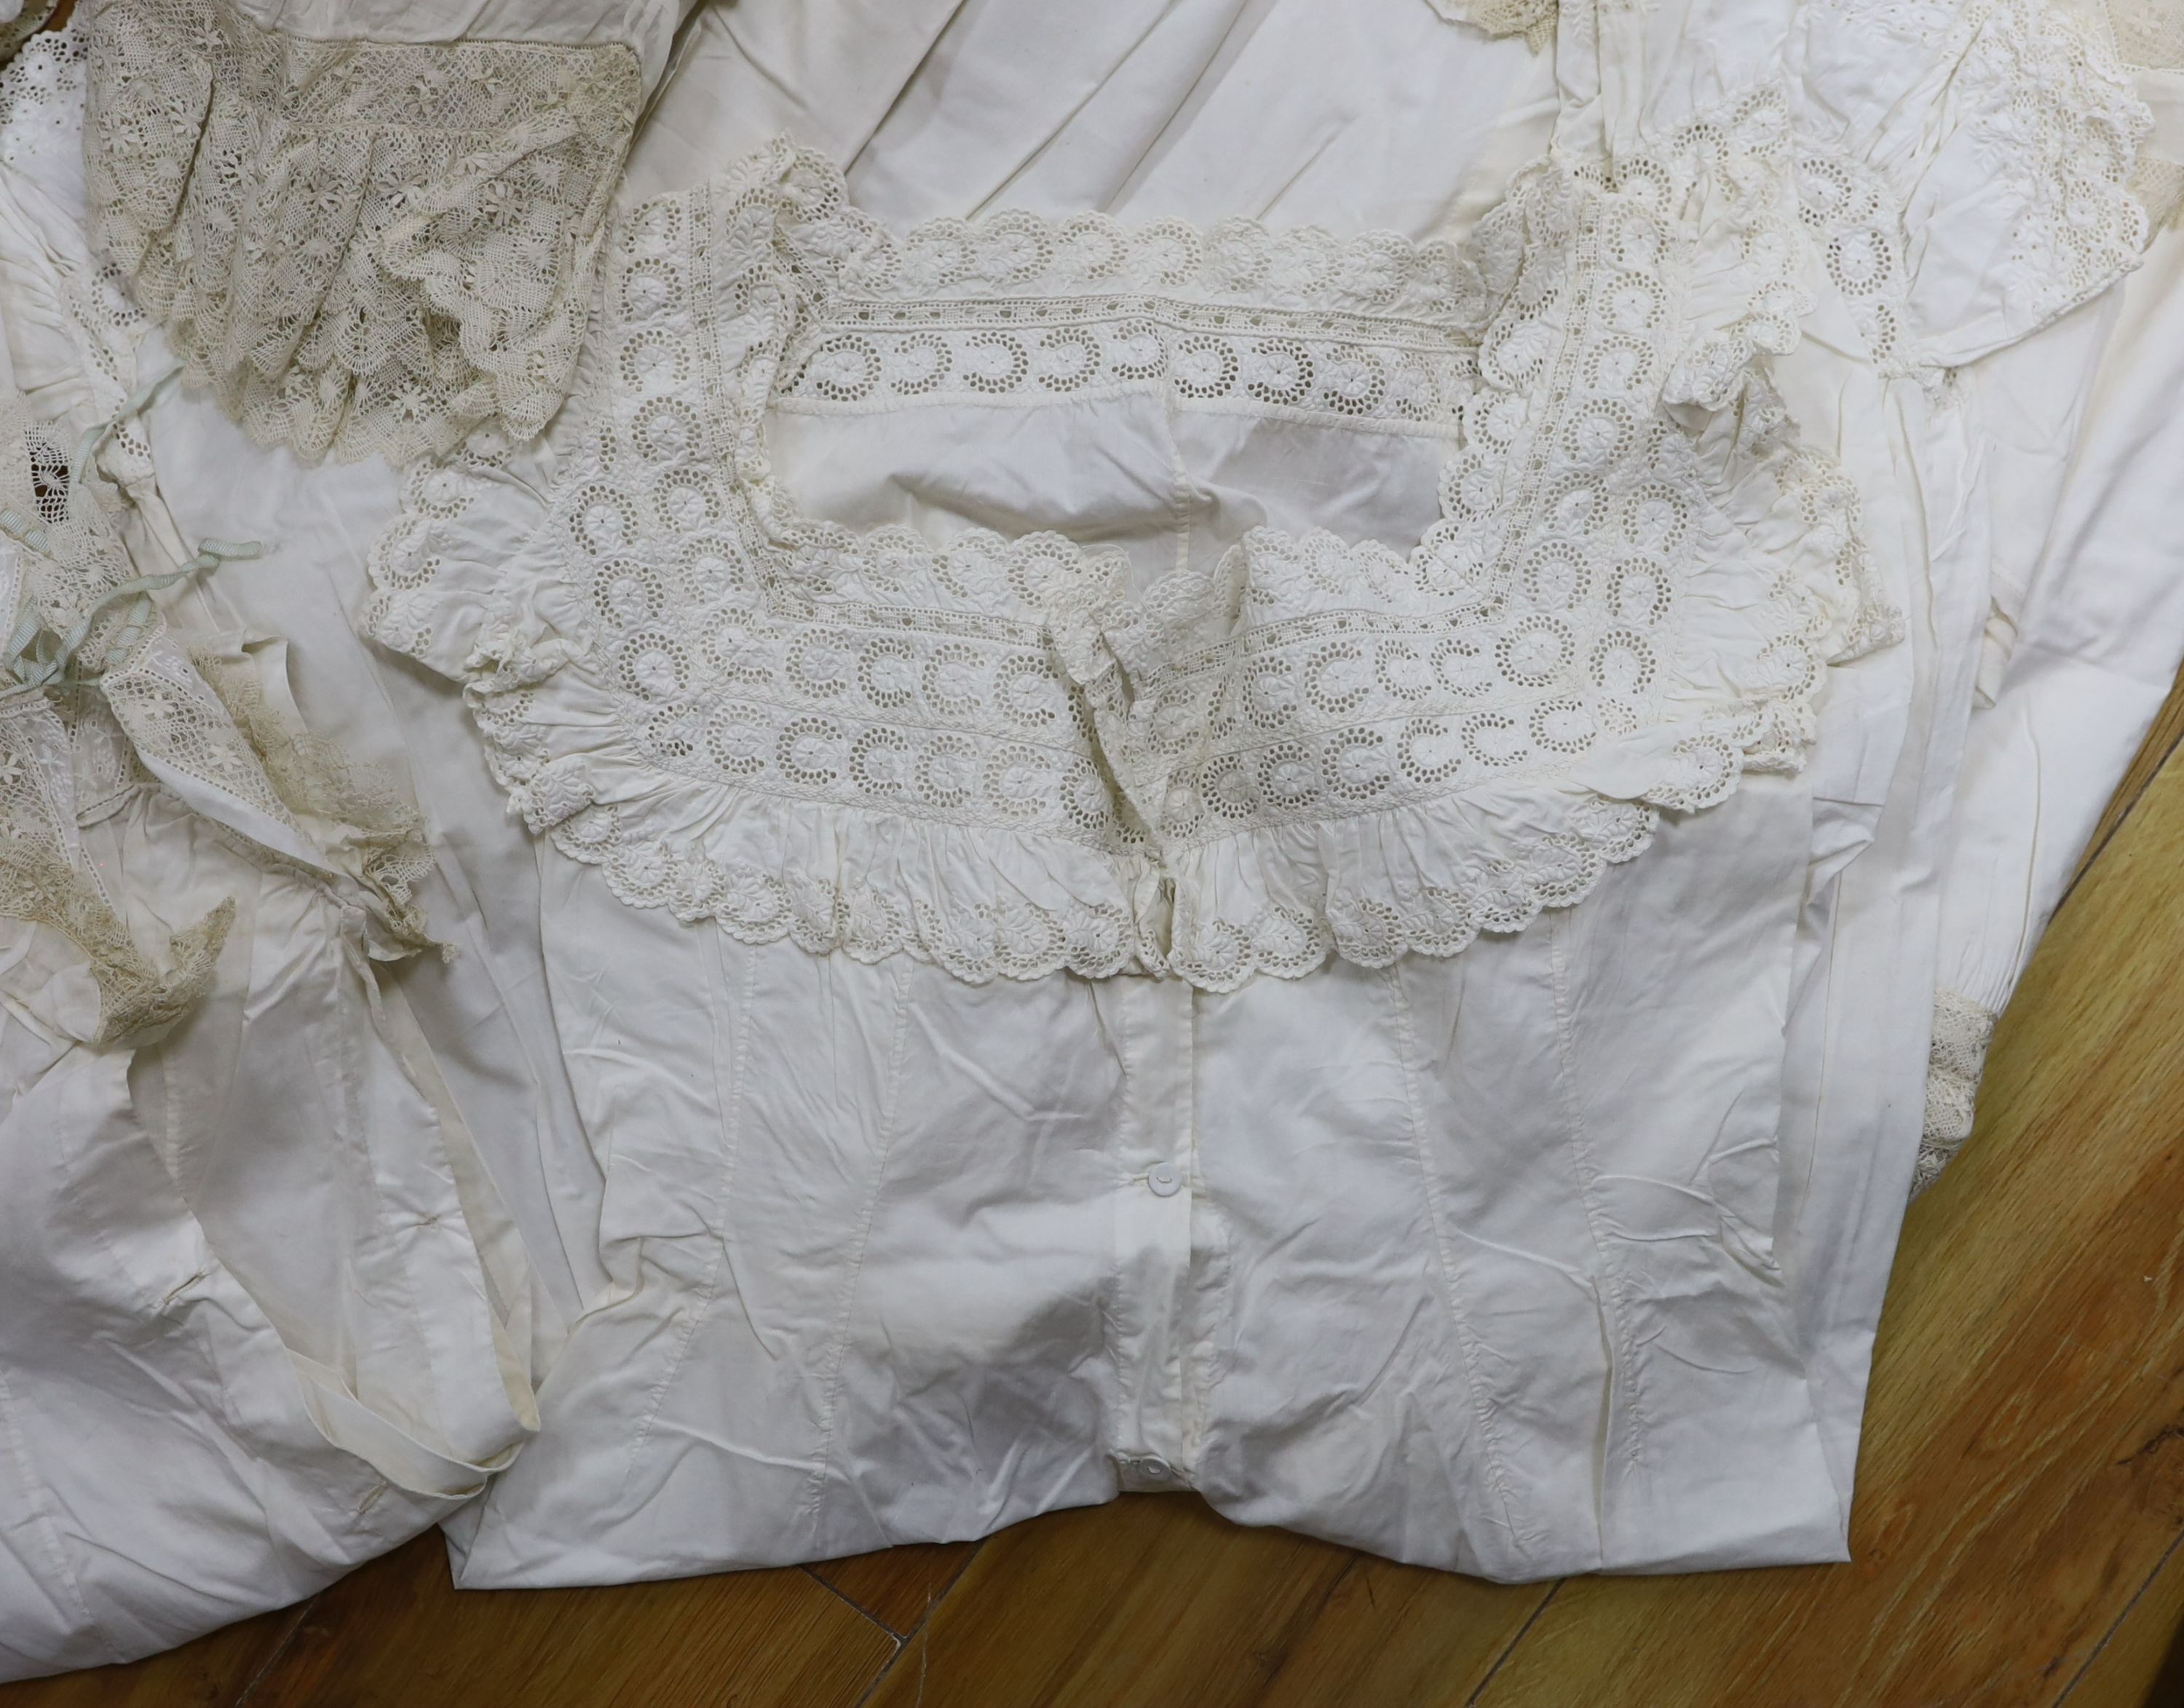 A collection of chemise/pantaloon lace inserted undergarments and a collection of petticoat flounces